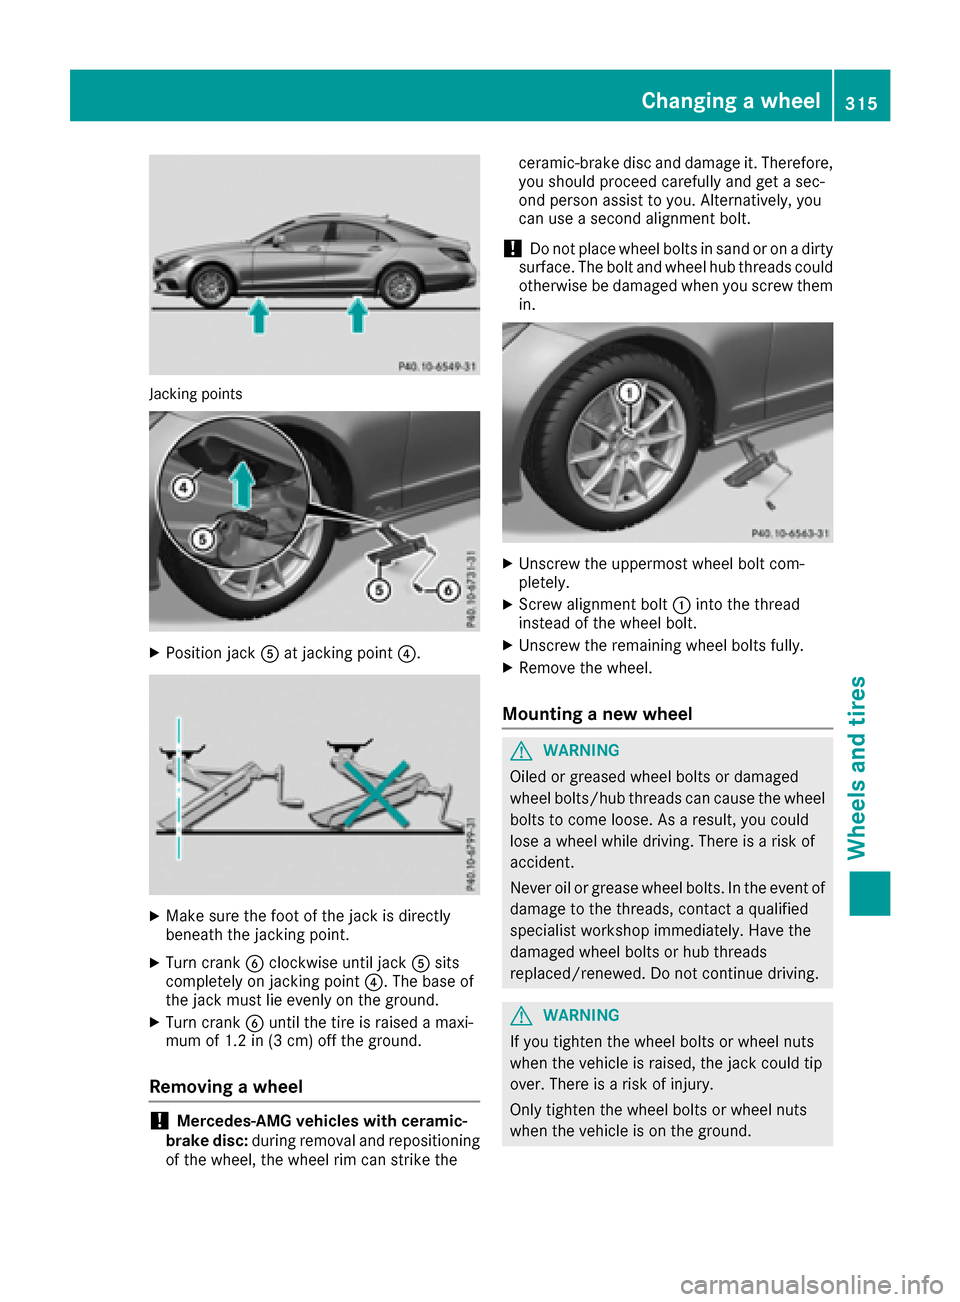 MERCEDES-BENZ CLS-Class 2017 W218 Owners Manual Jacking points
XPosition jackAat jacking point ?.
XMake sure the foot of the jack is directly
beneath the jacking point.
XTurn crankBclockwise until jack Asits
completely on jacking point ?. The base 